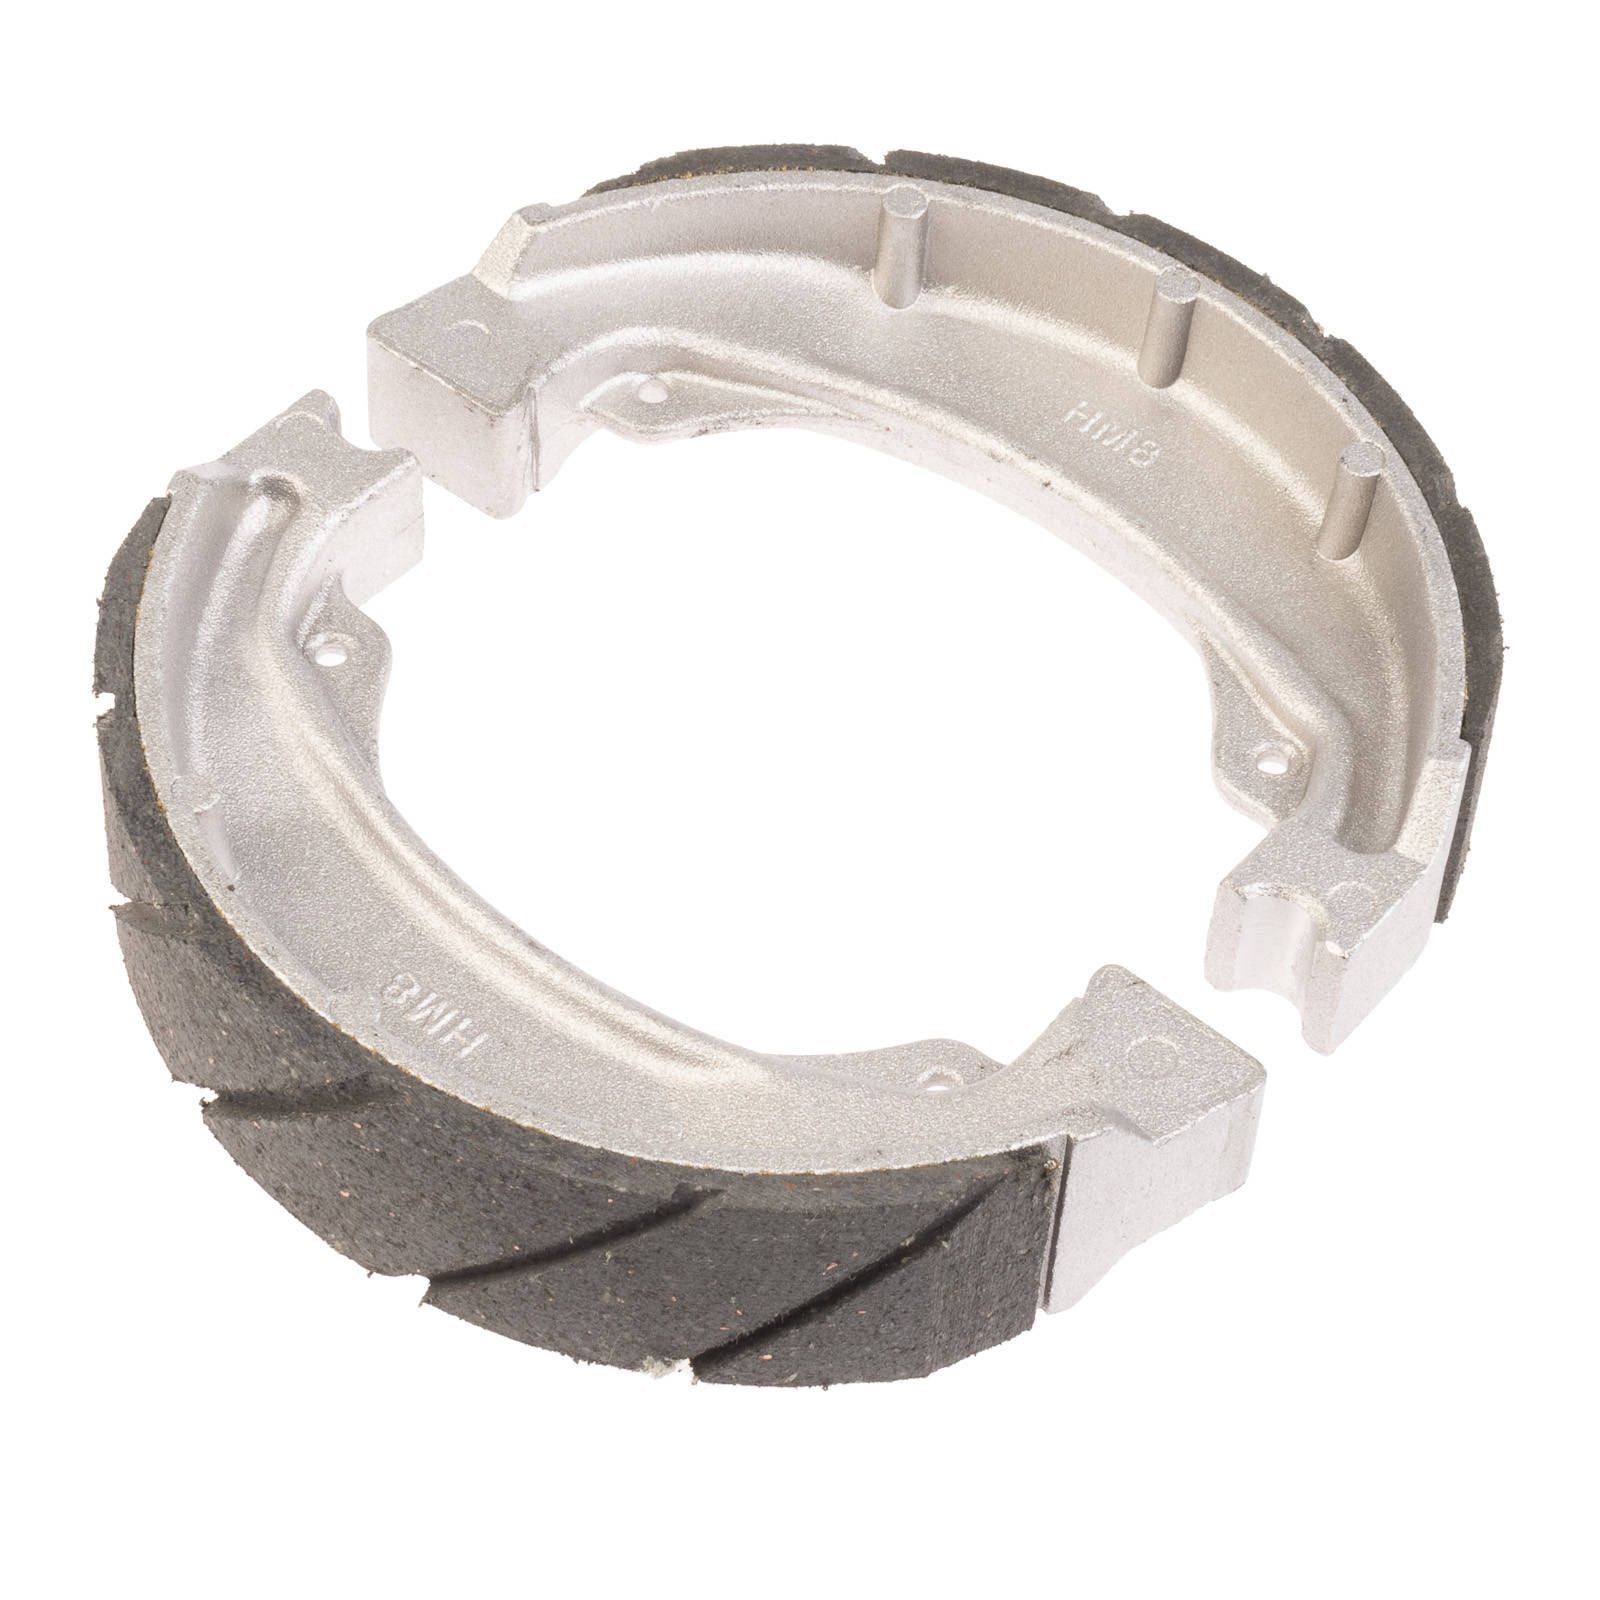 New WHITES Motorcycle Brake Shoes - Water Groove #WPBS39185